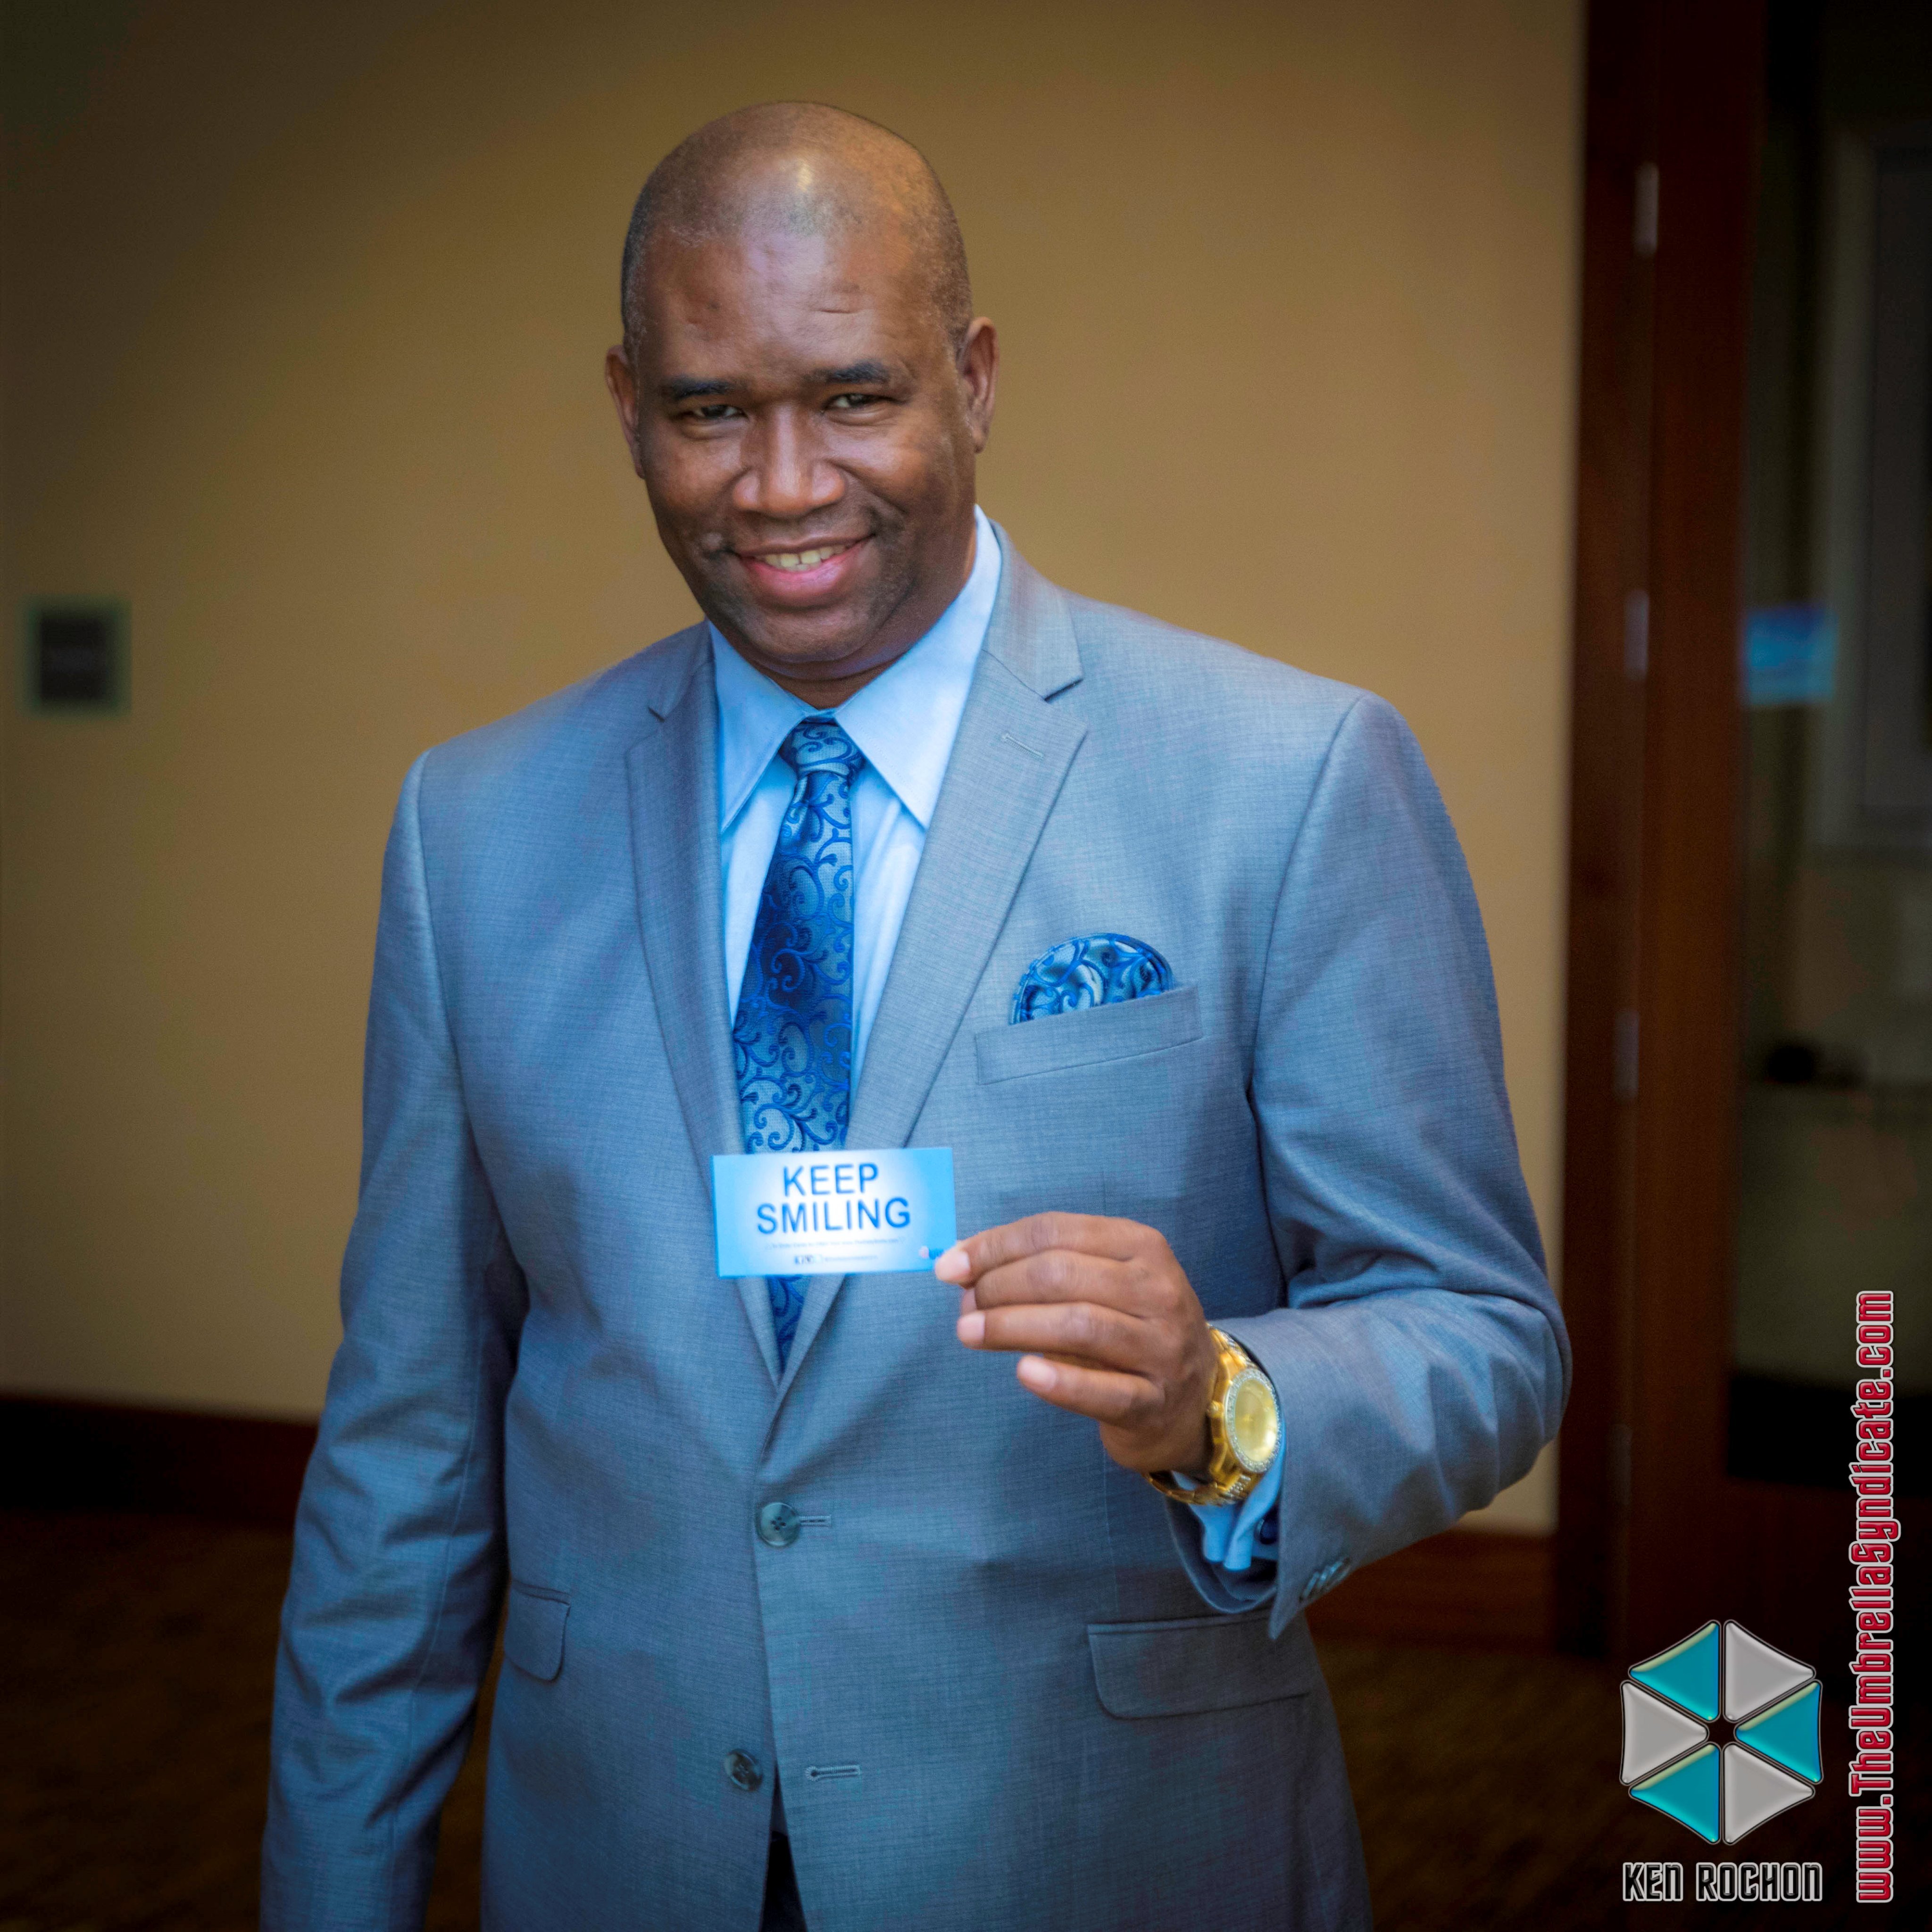 Orrin Checkmate Hudson is a motivational speaker, chess champion and community leader who started a anti violence nonprofit called  Be Someone, Inc.